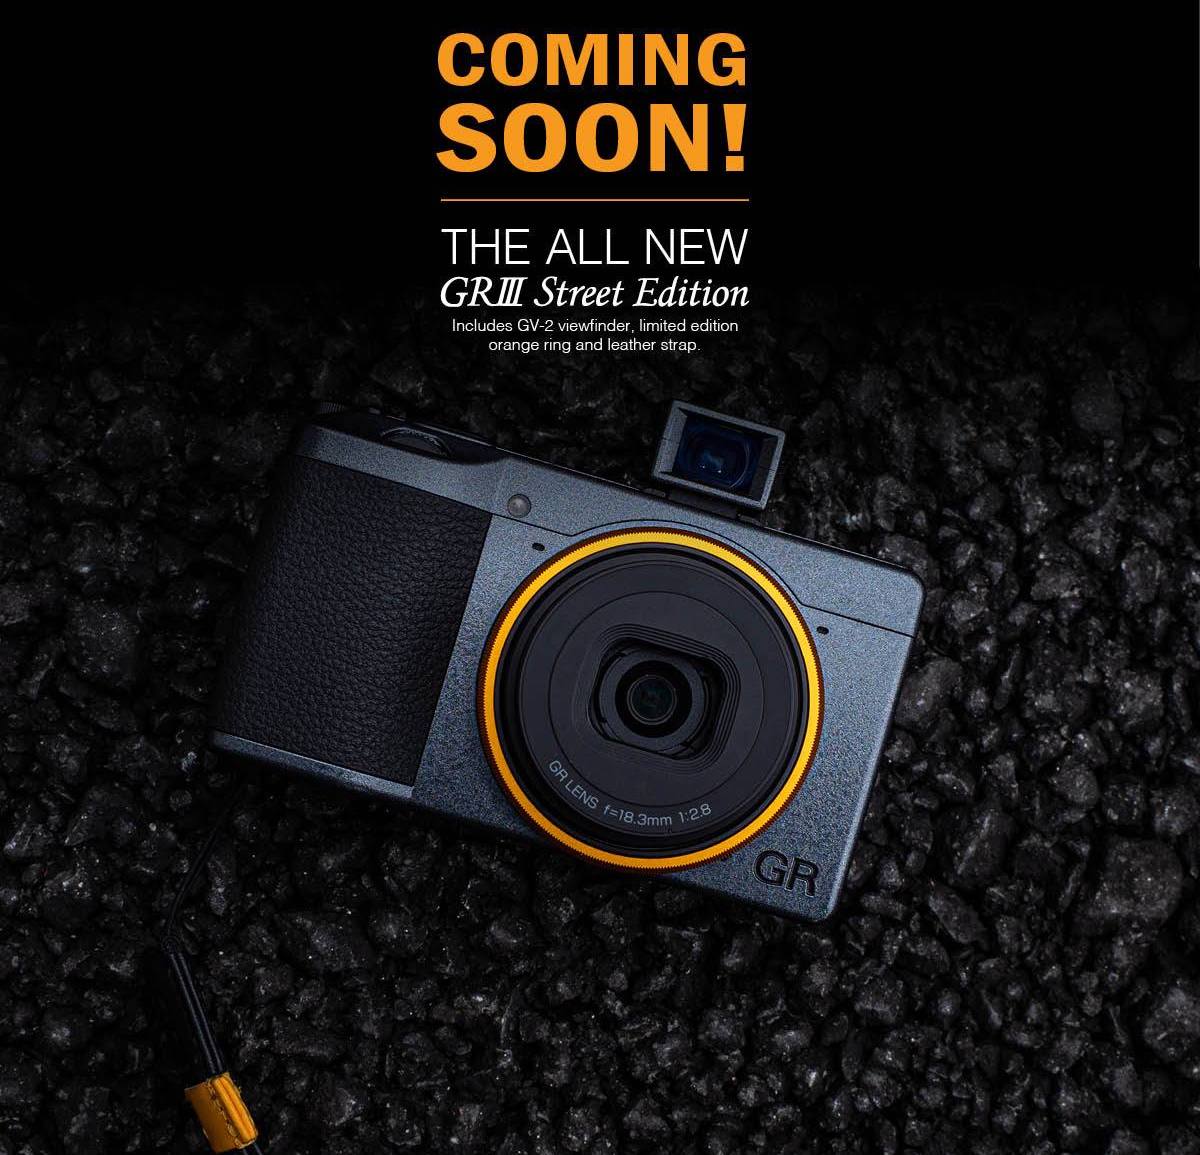 Ricoh GR III Street Edition Special Limited Camera Kit announced